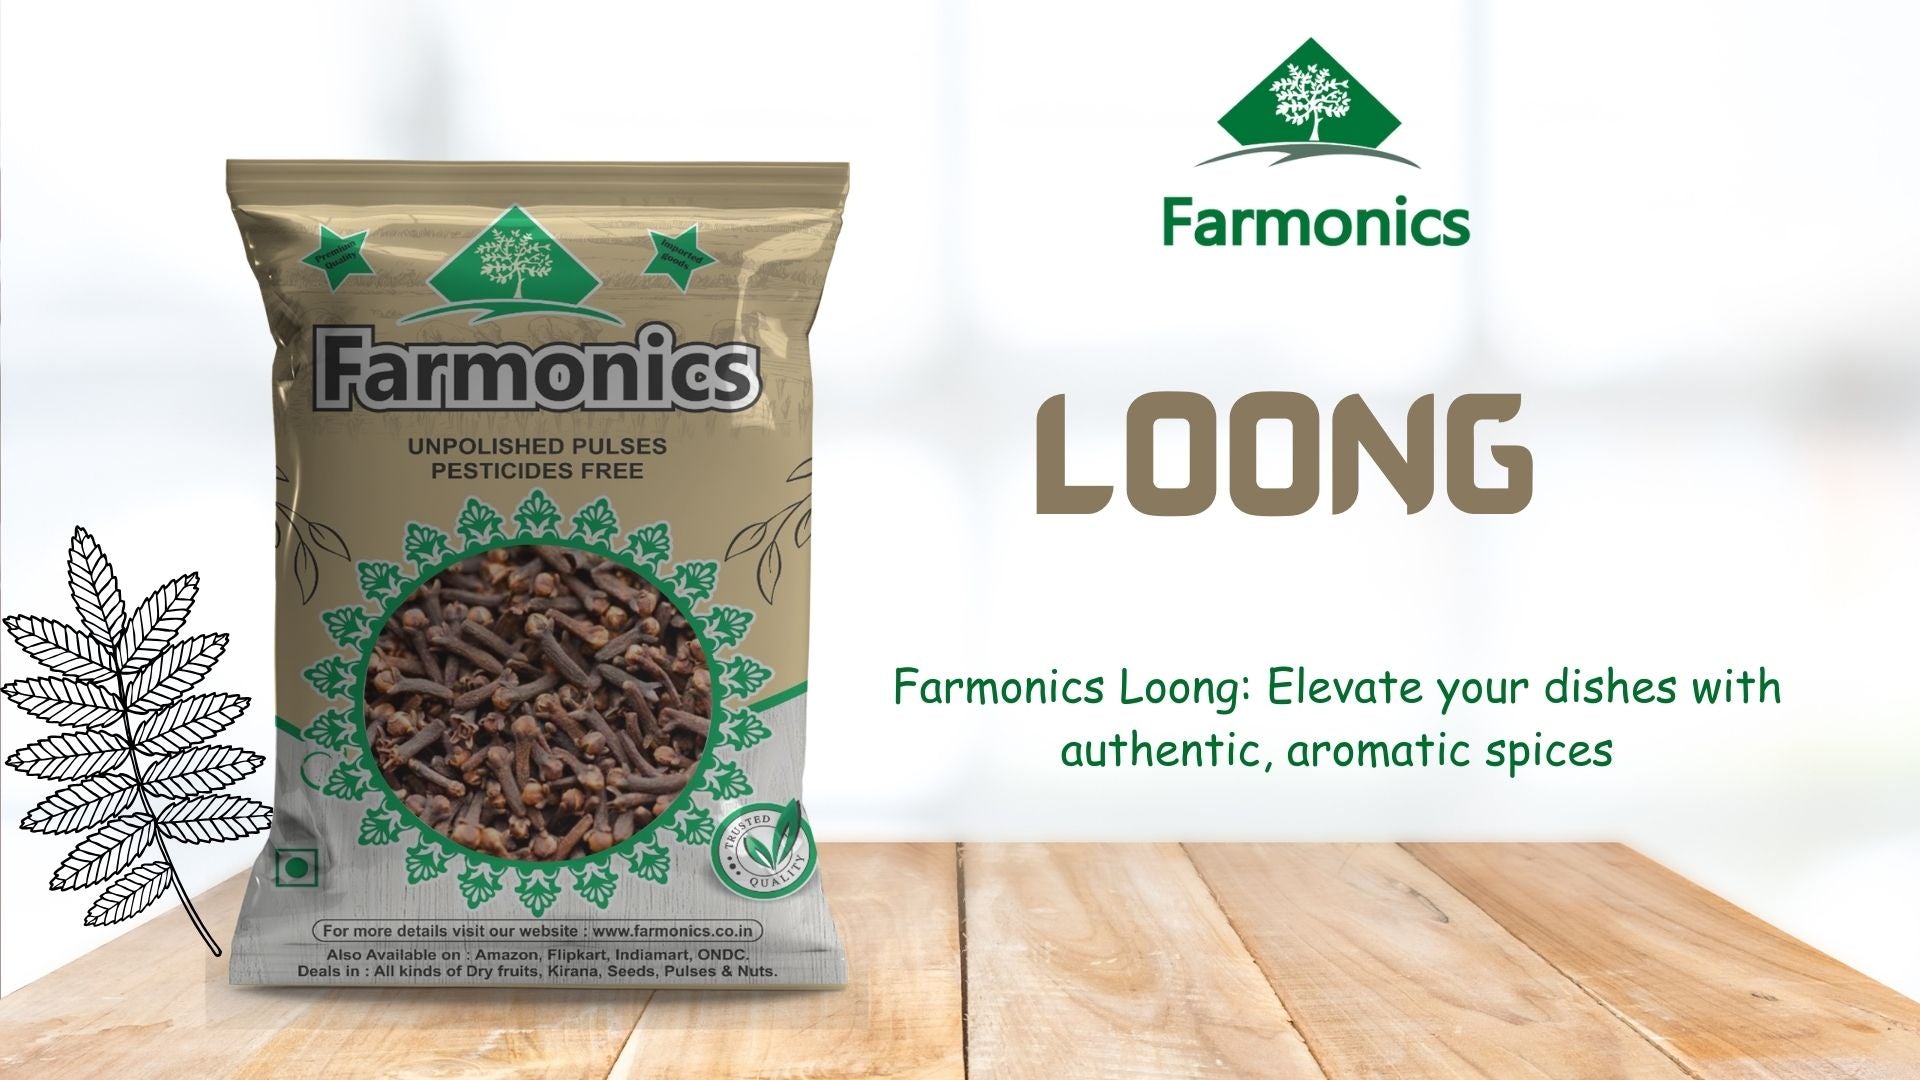 with Framonics best quality laung/cloves :elevate your dishes with authentic, aromatic spices 